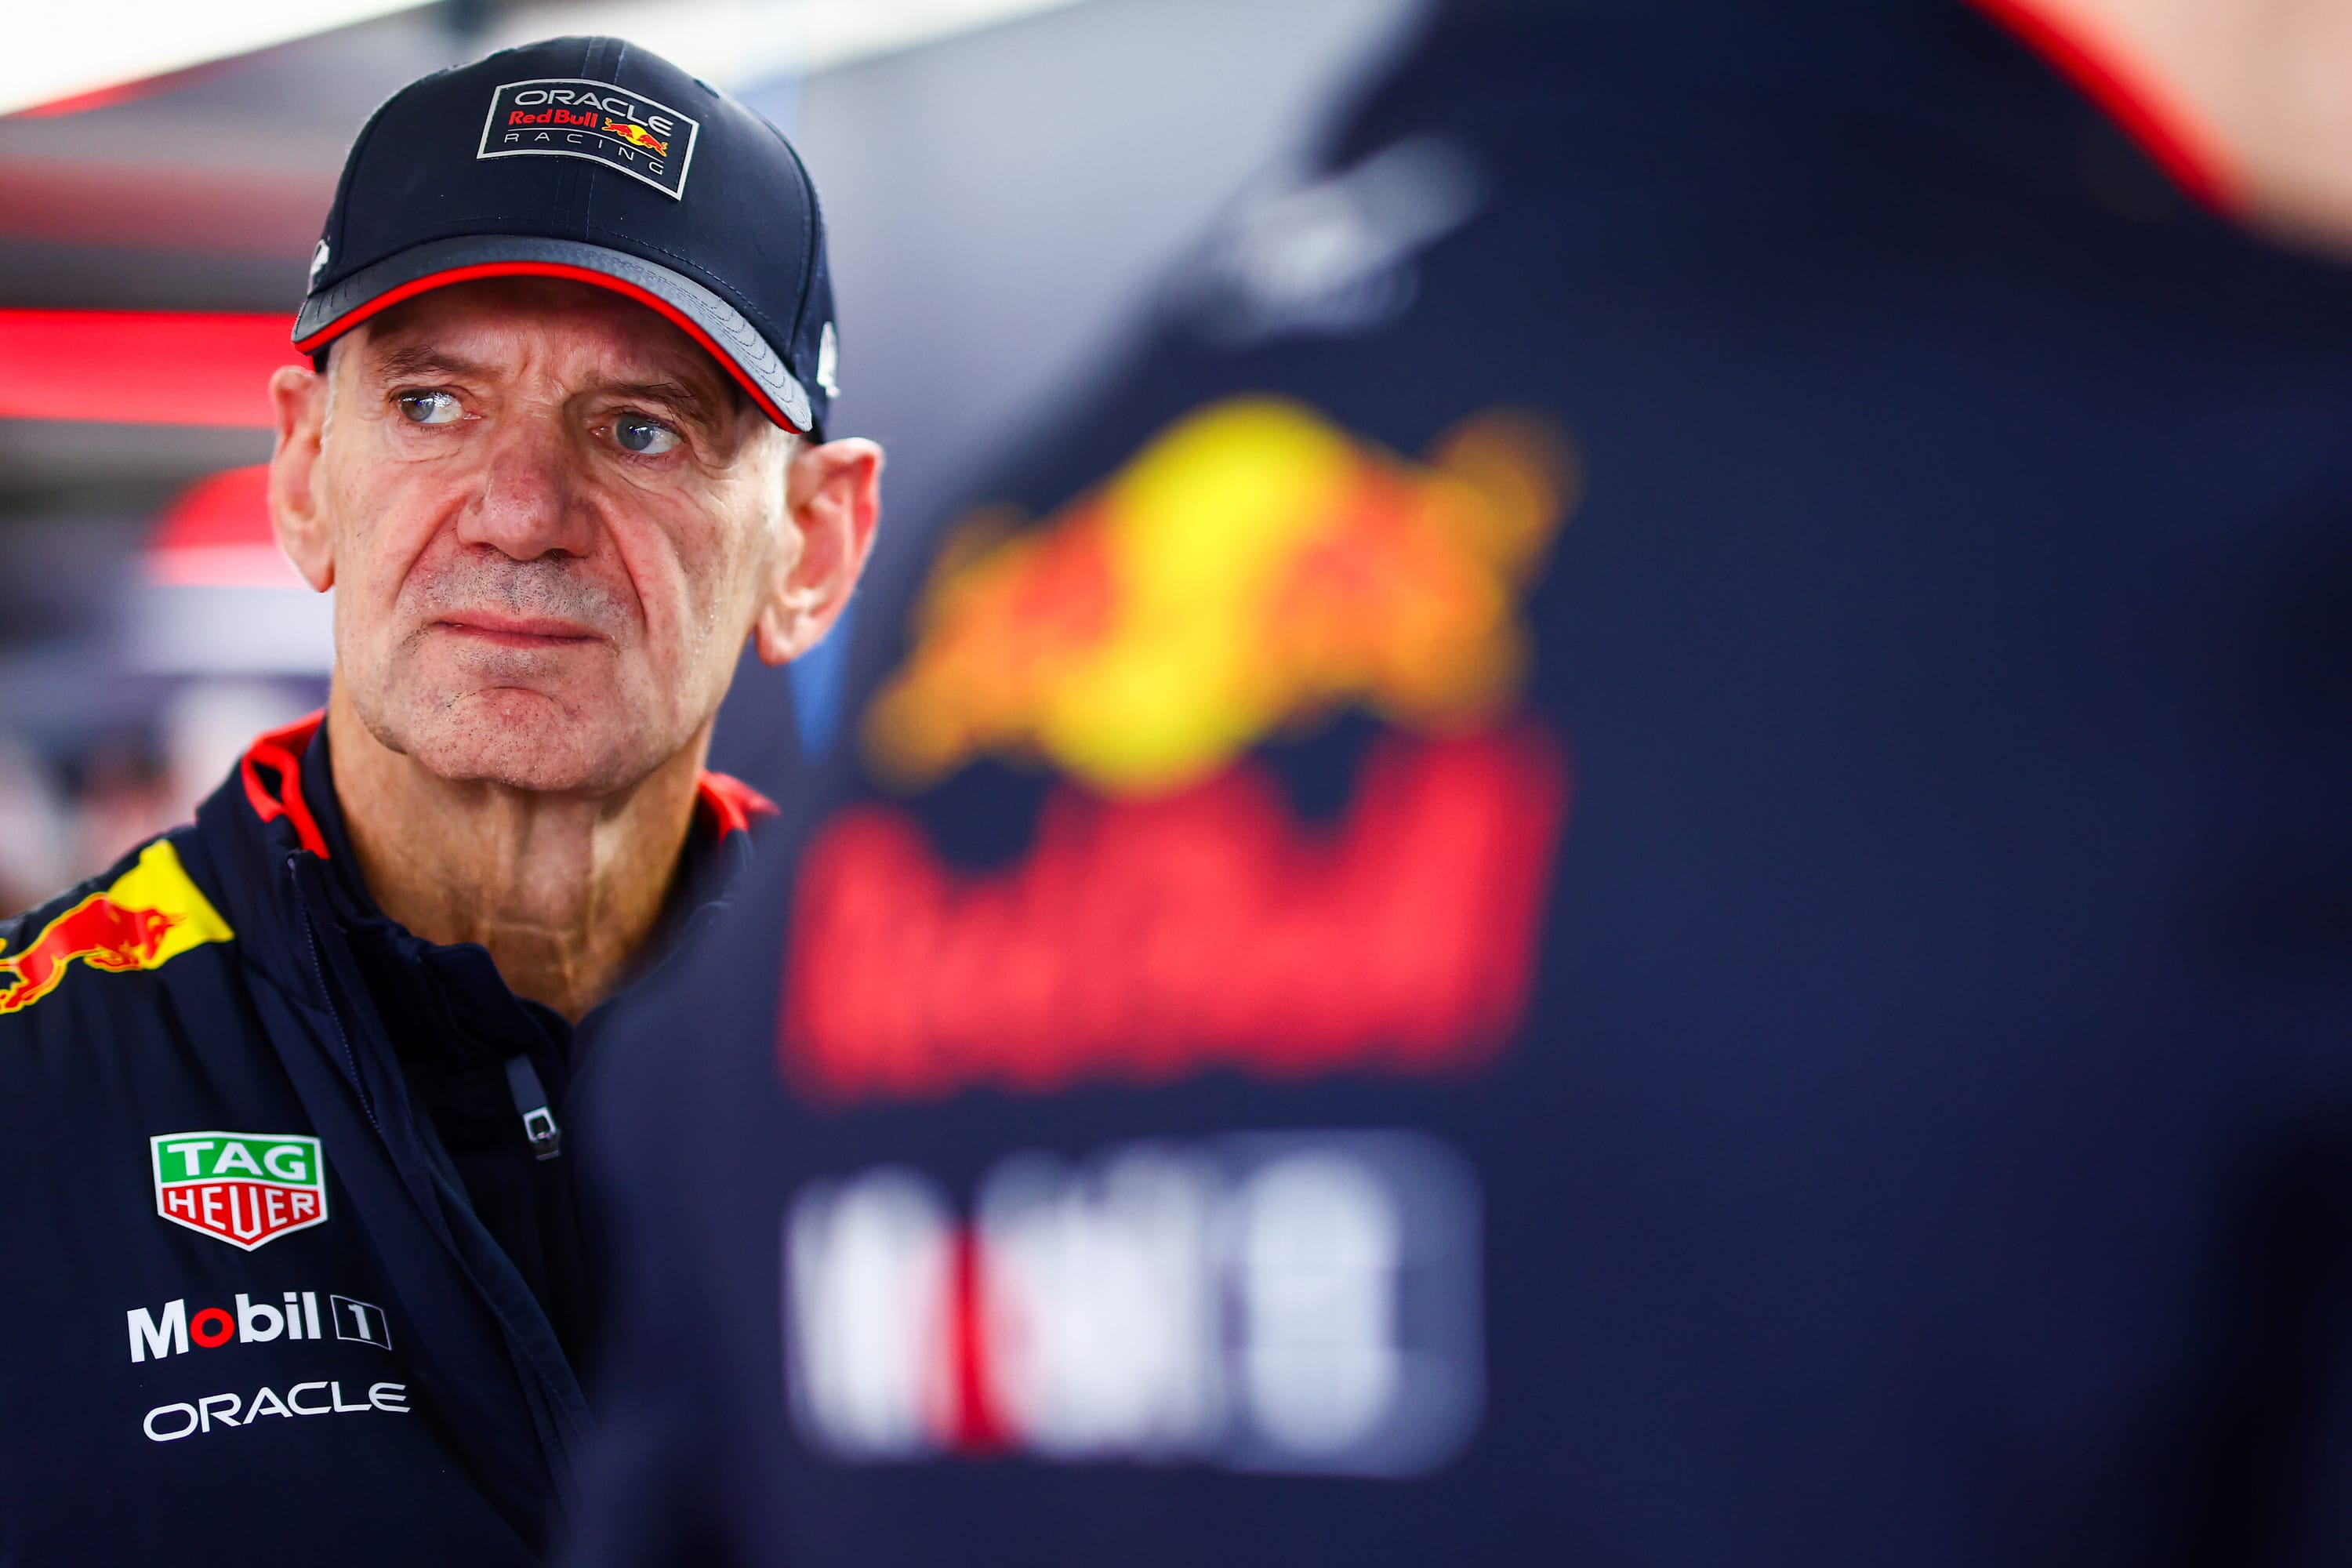 How a Newey departure could impact Red Bull